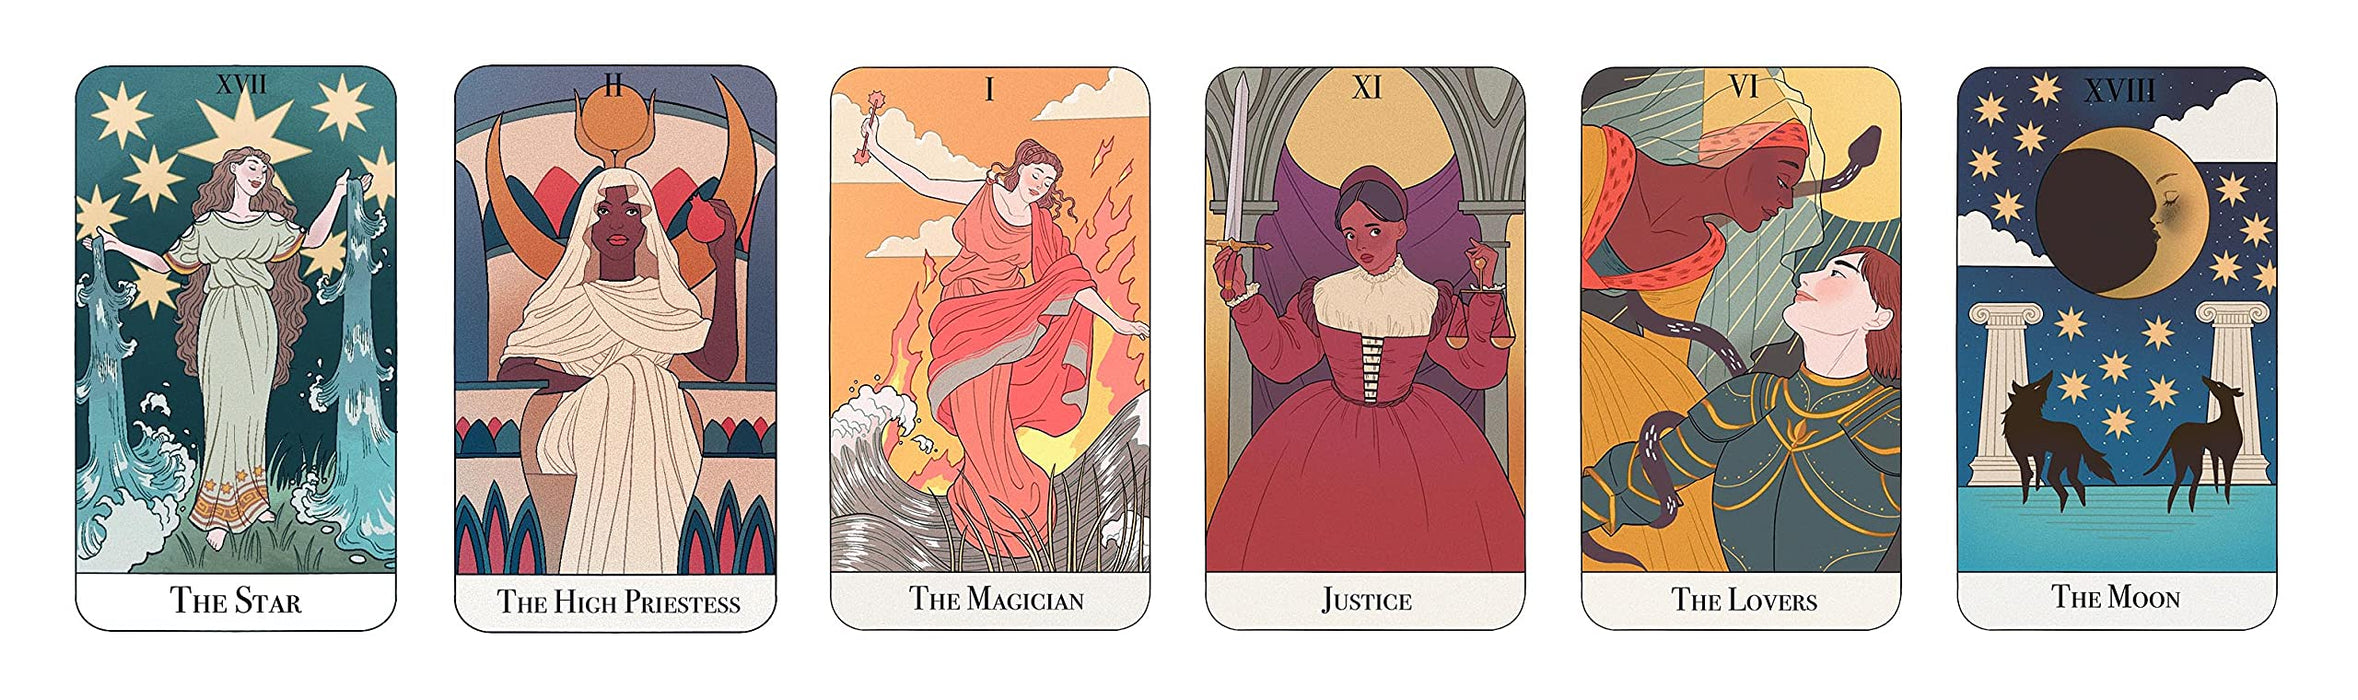 The Essential Tarot: A 78-Card Deck with Guidebook (Modern Tarot Library)